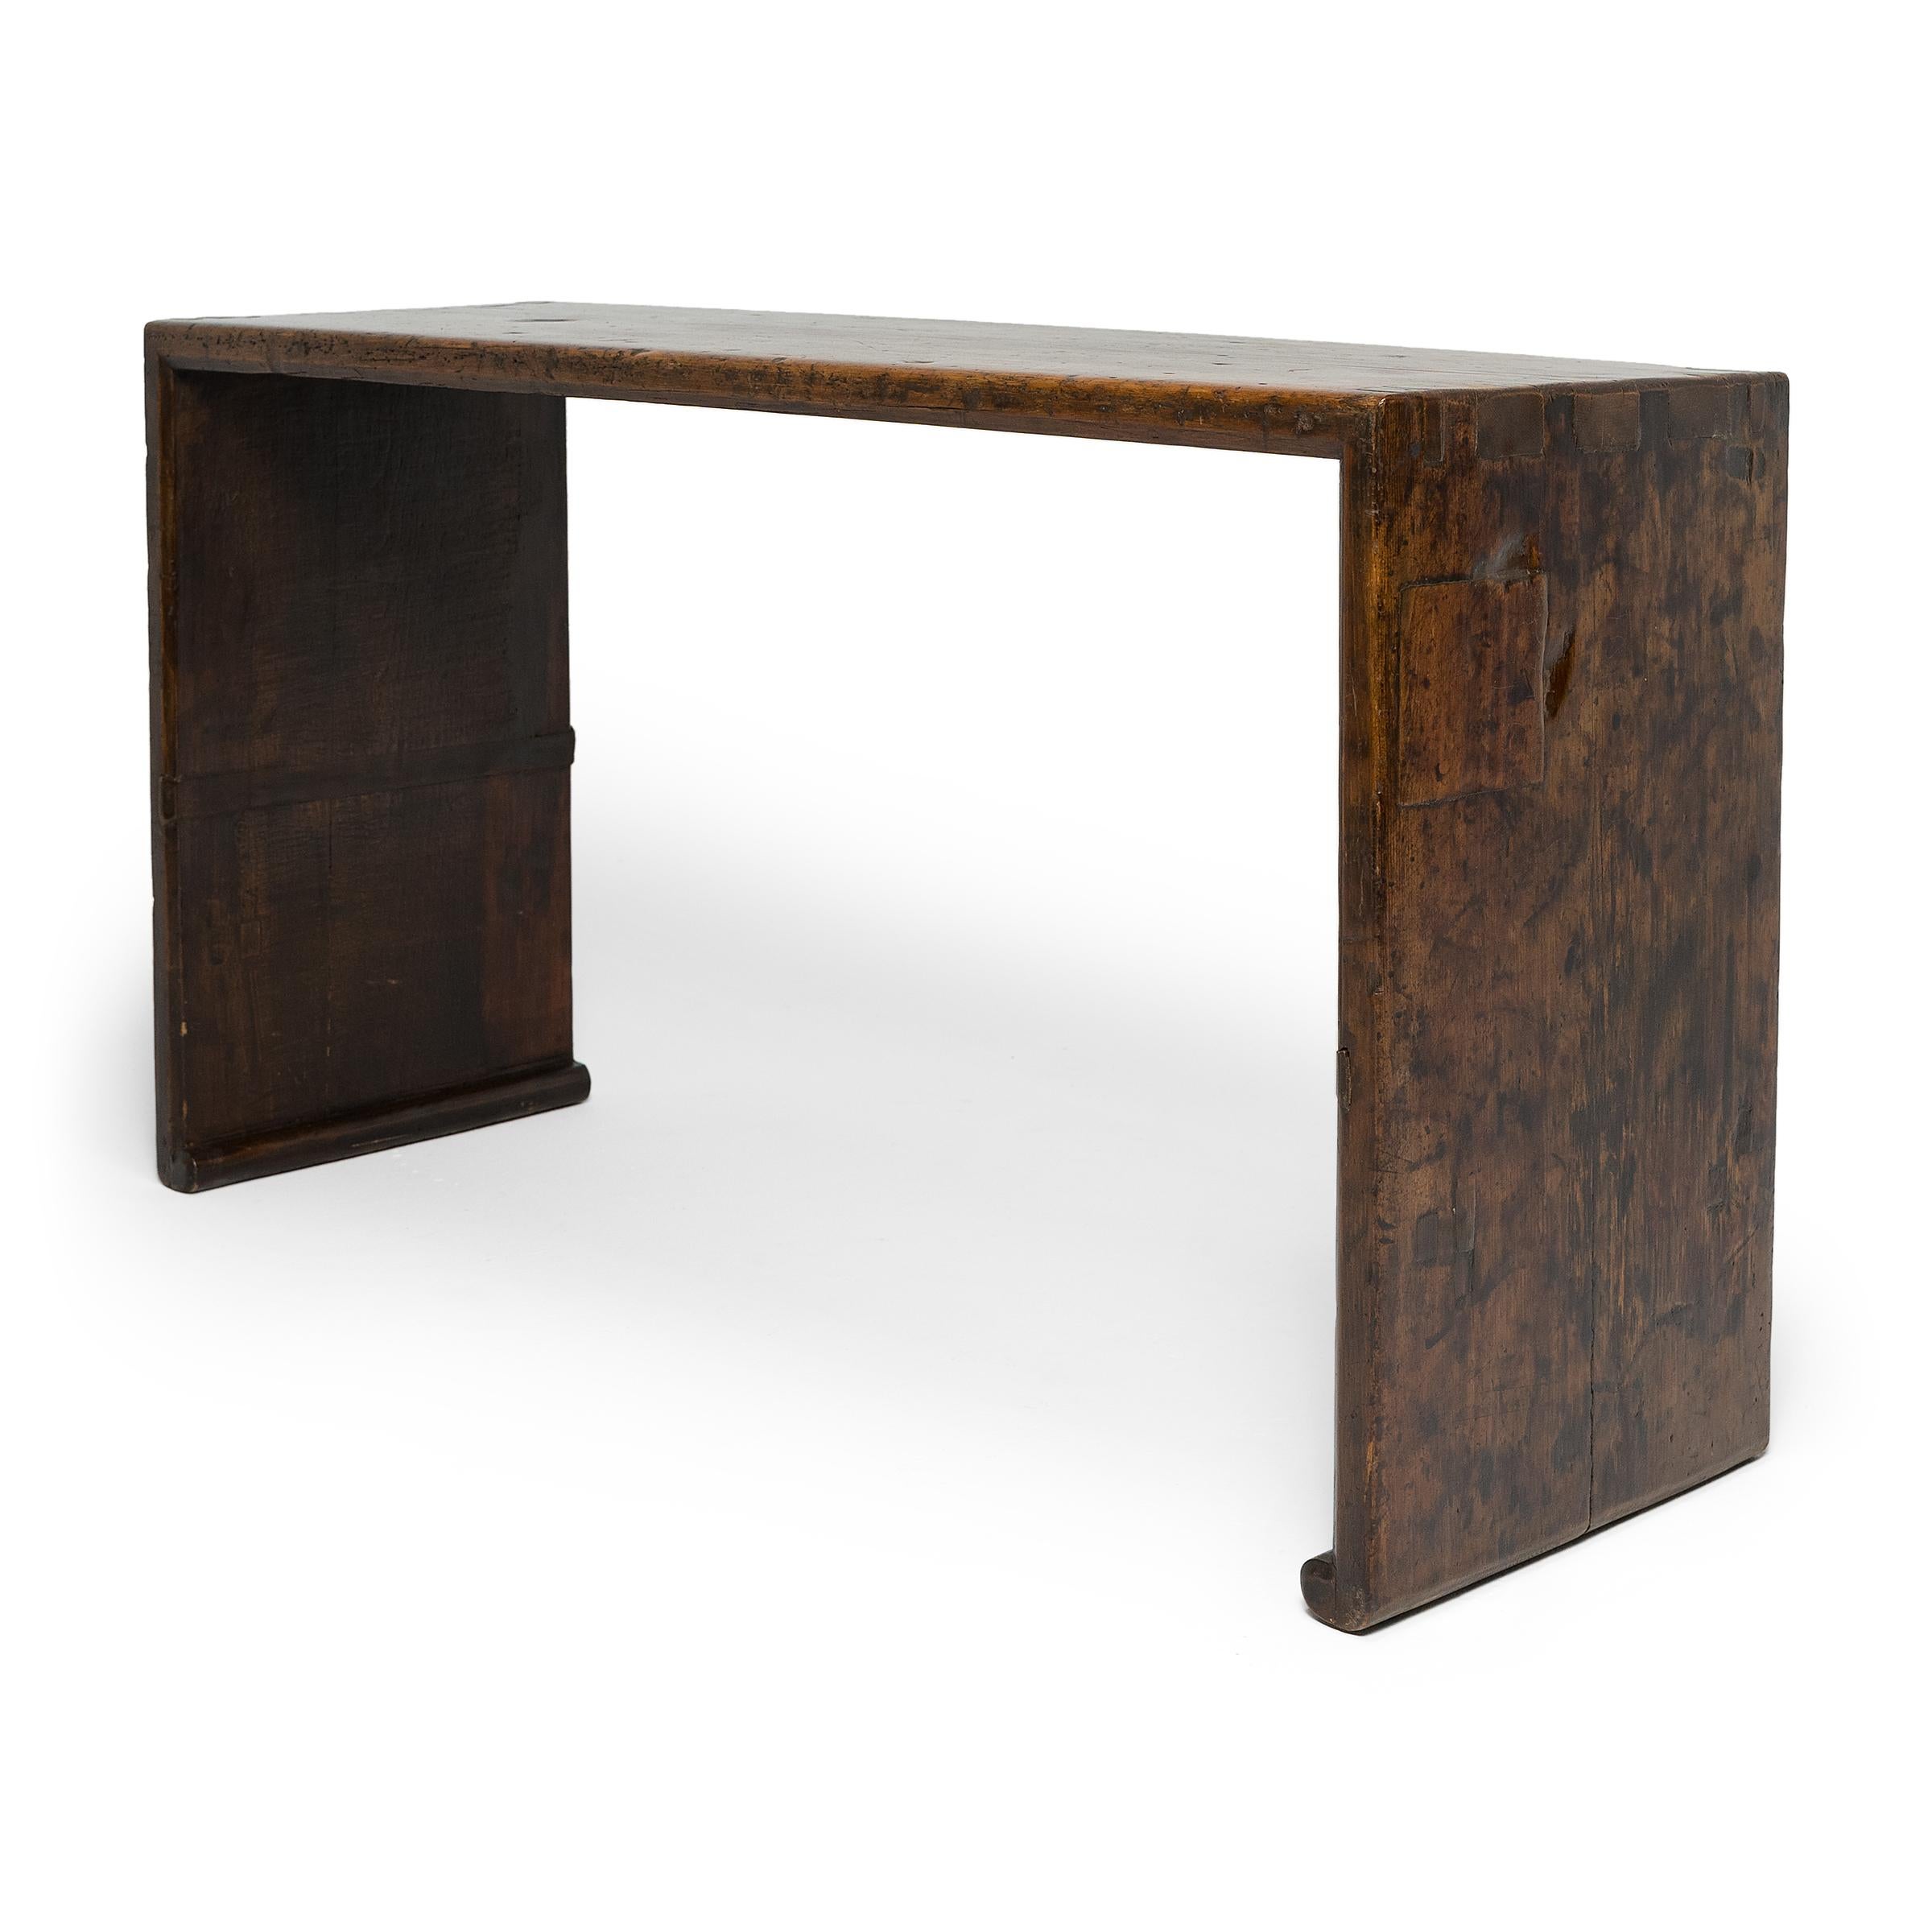 Minimalist Elegant Chinese Waterfall Altar Table, c. 1850 For Sale